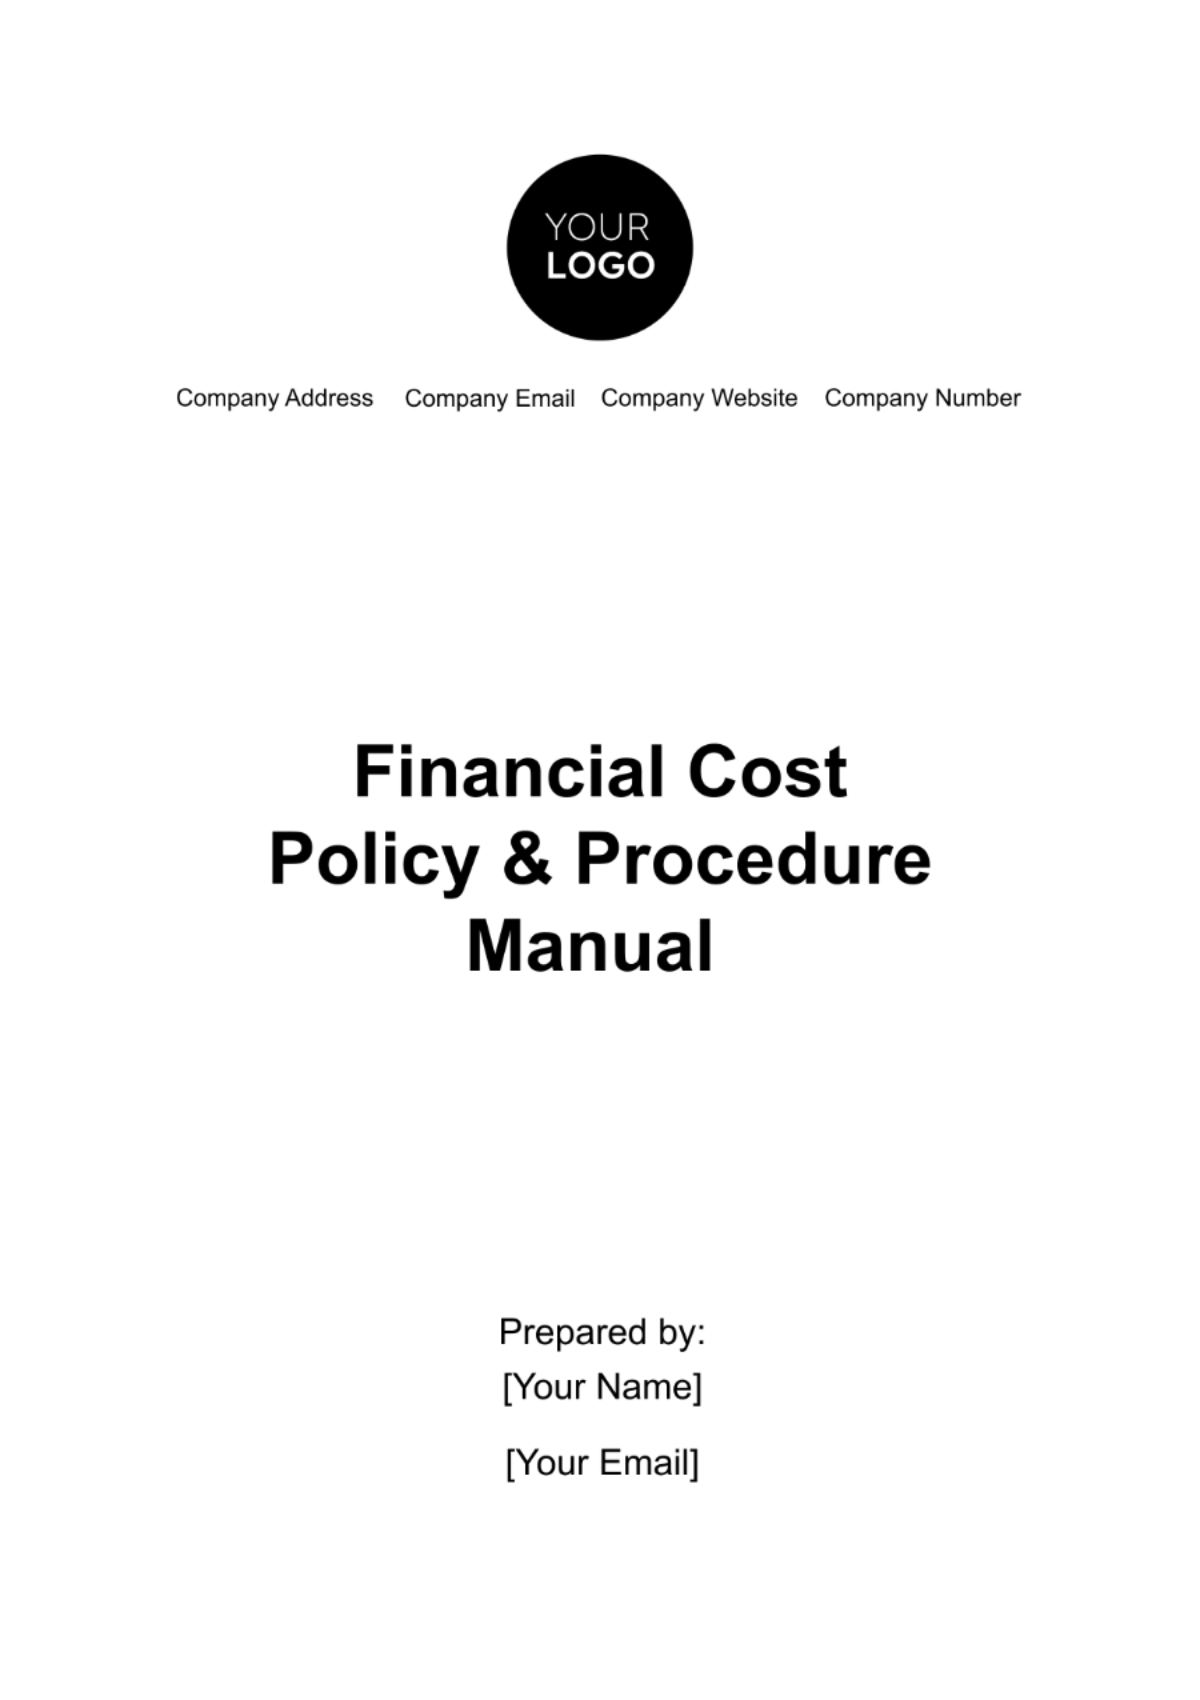 Free Financial Cost Policy & Procedure Manual Template